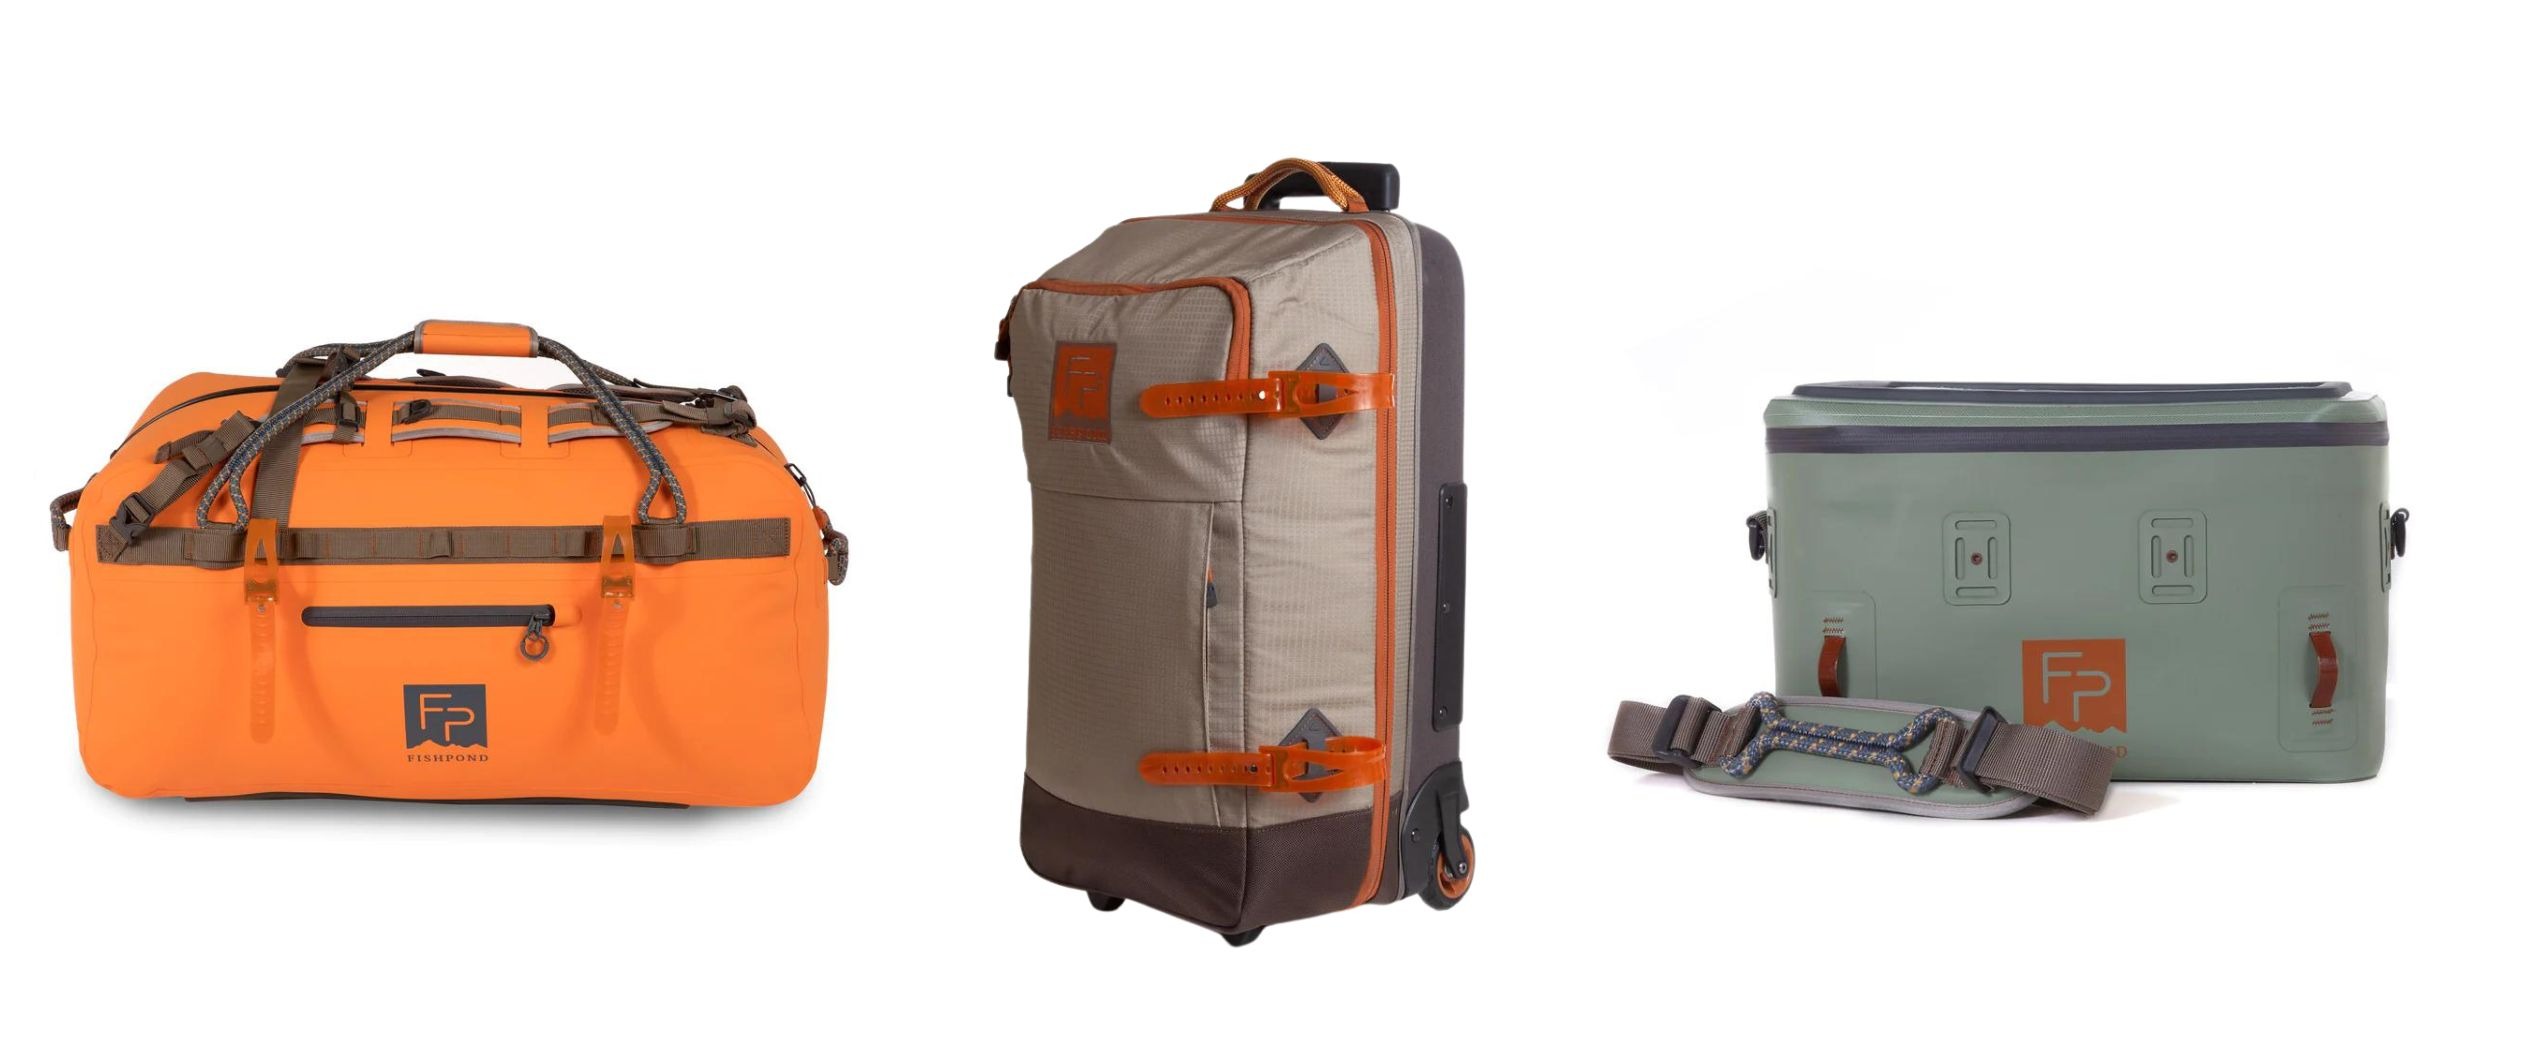 Shop Fishpond Fly Fishing Travel Luggage and Storage